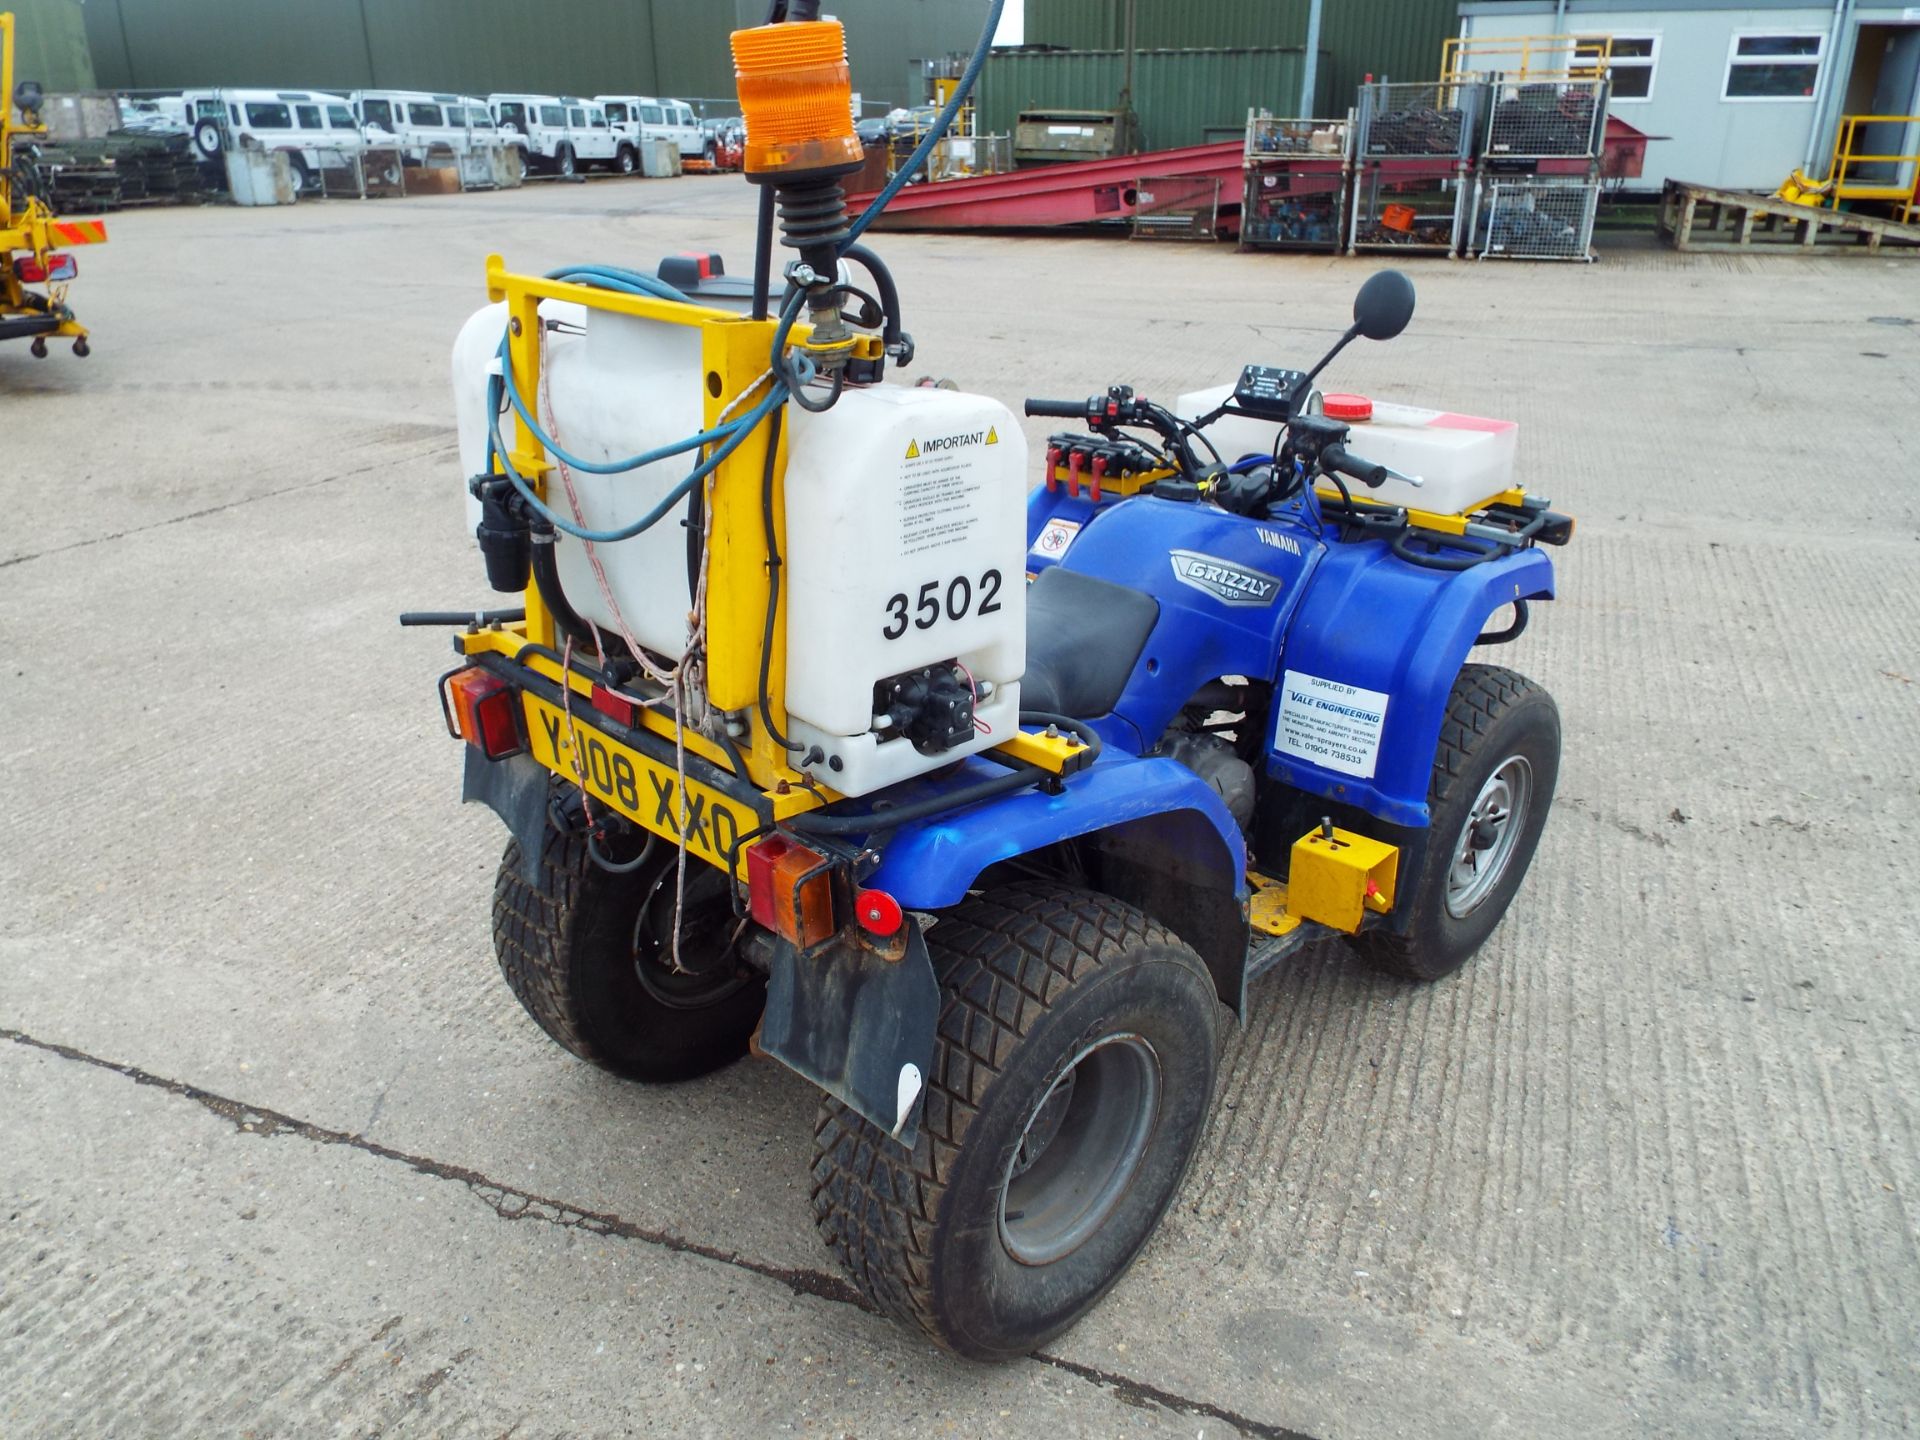 2008 Yamaha Grizzly 350 Ultramatic Quad Bike fitted with Vale Front/Rear Spraying Equipment - Bild 7 aus 26